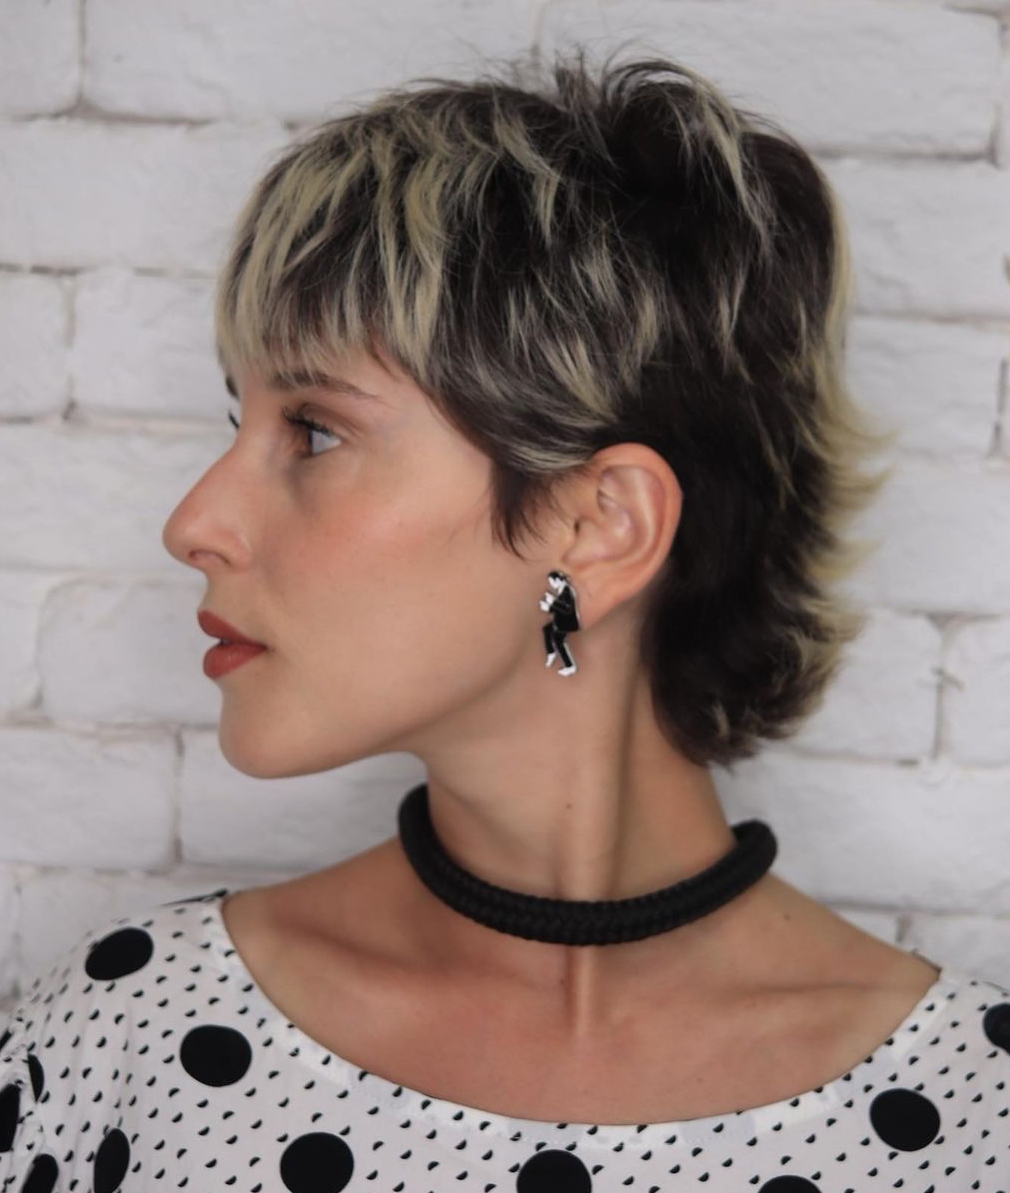 Two-Toned Pixie Cut on Black Hair with Blonde Highlights